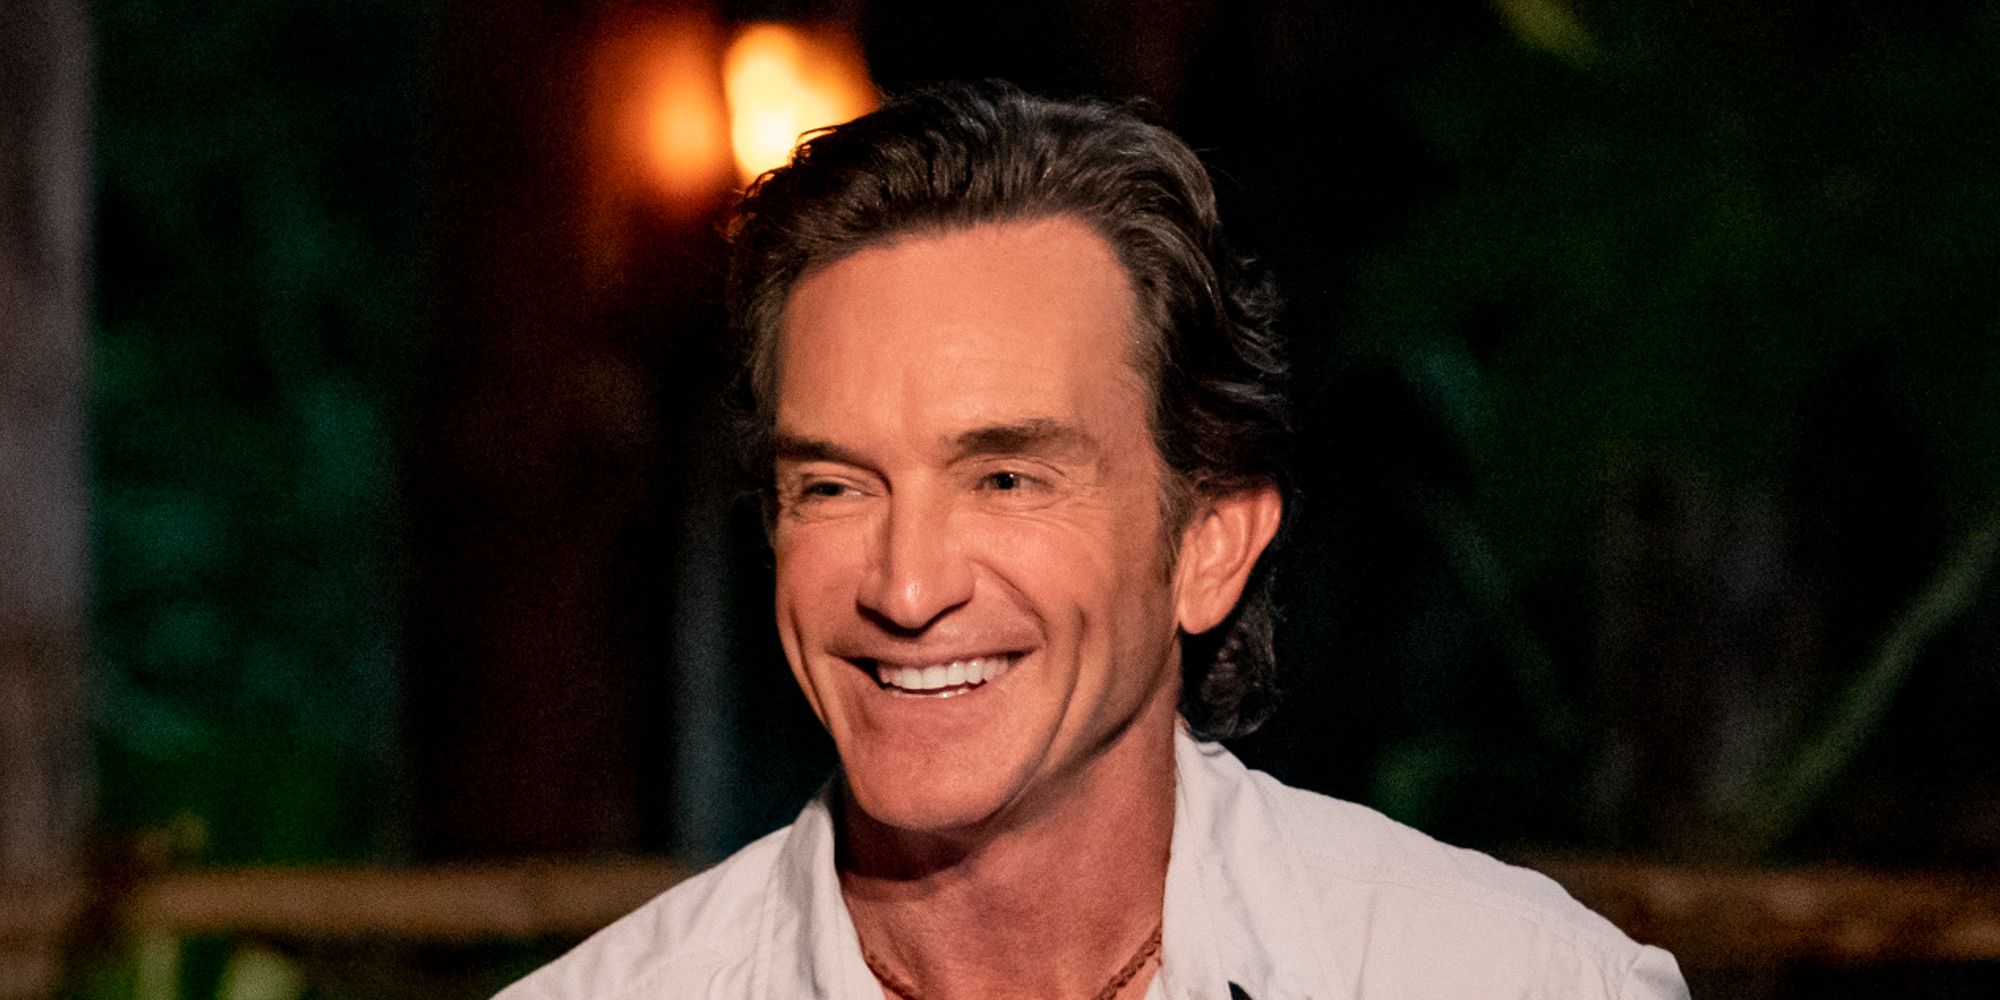 Jeff Probst smiling on Survivor season 41 at Tribal Council